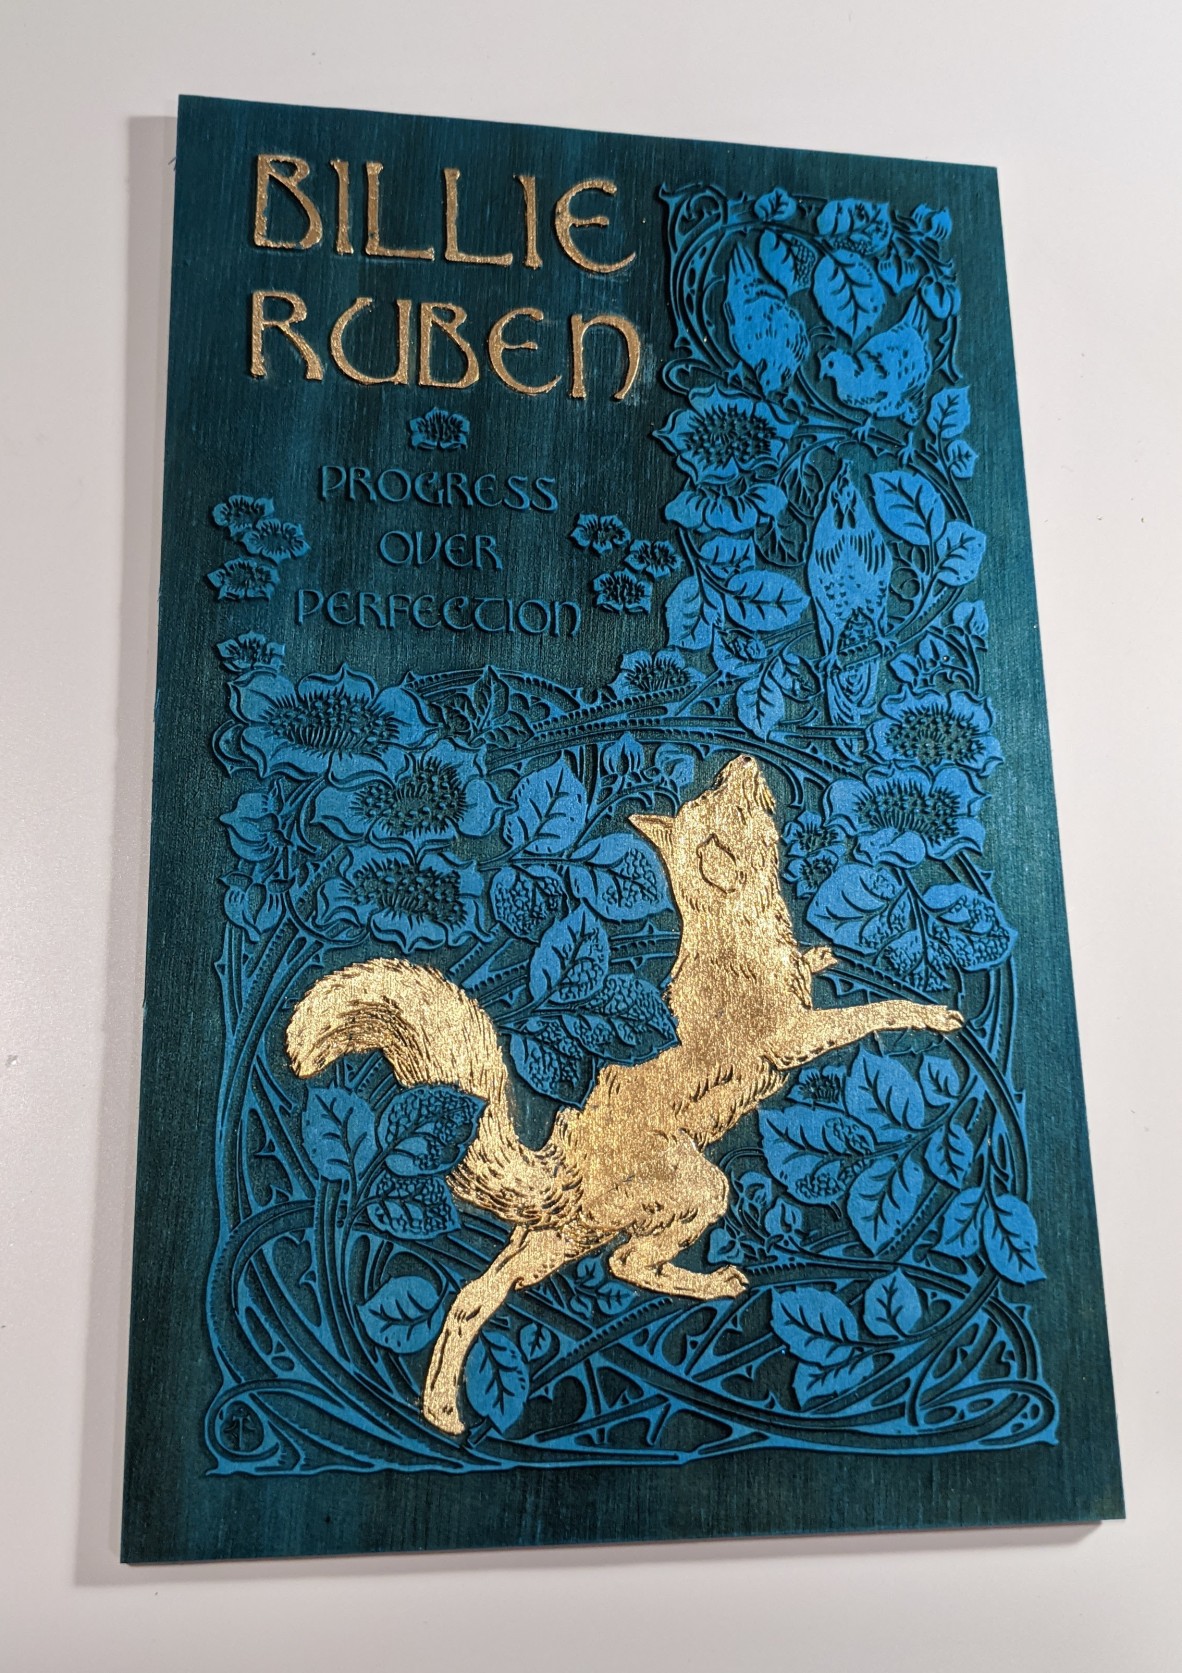 laser etched cover dyed and gold leafed